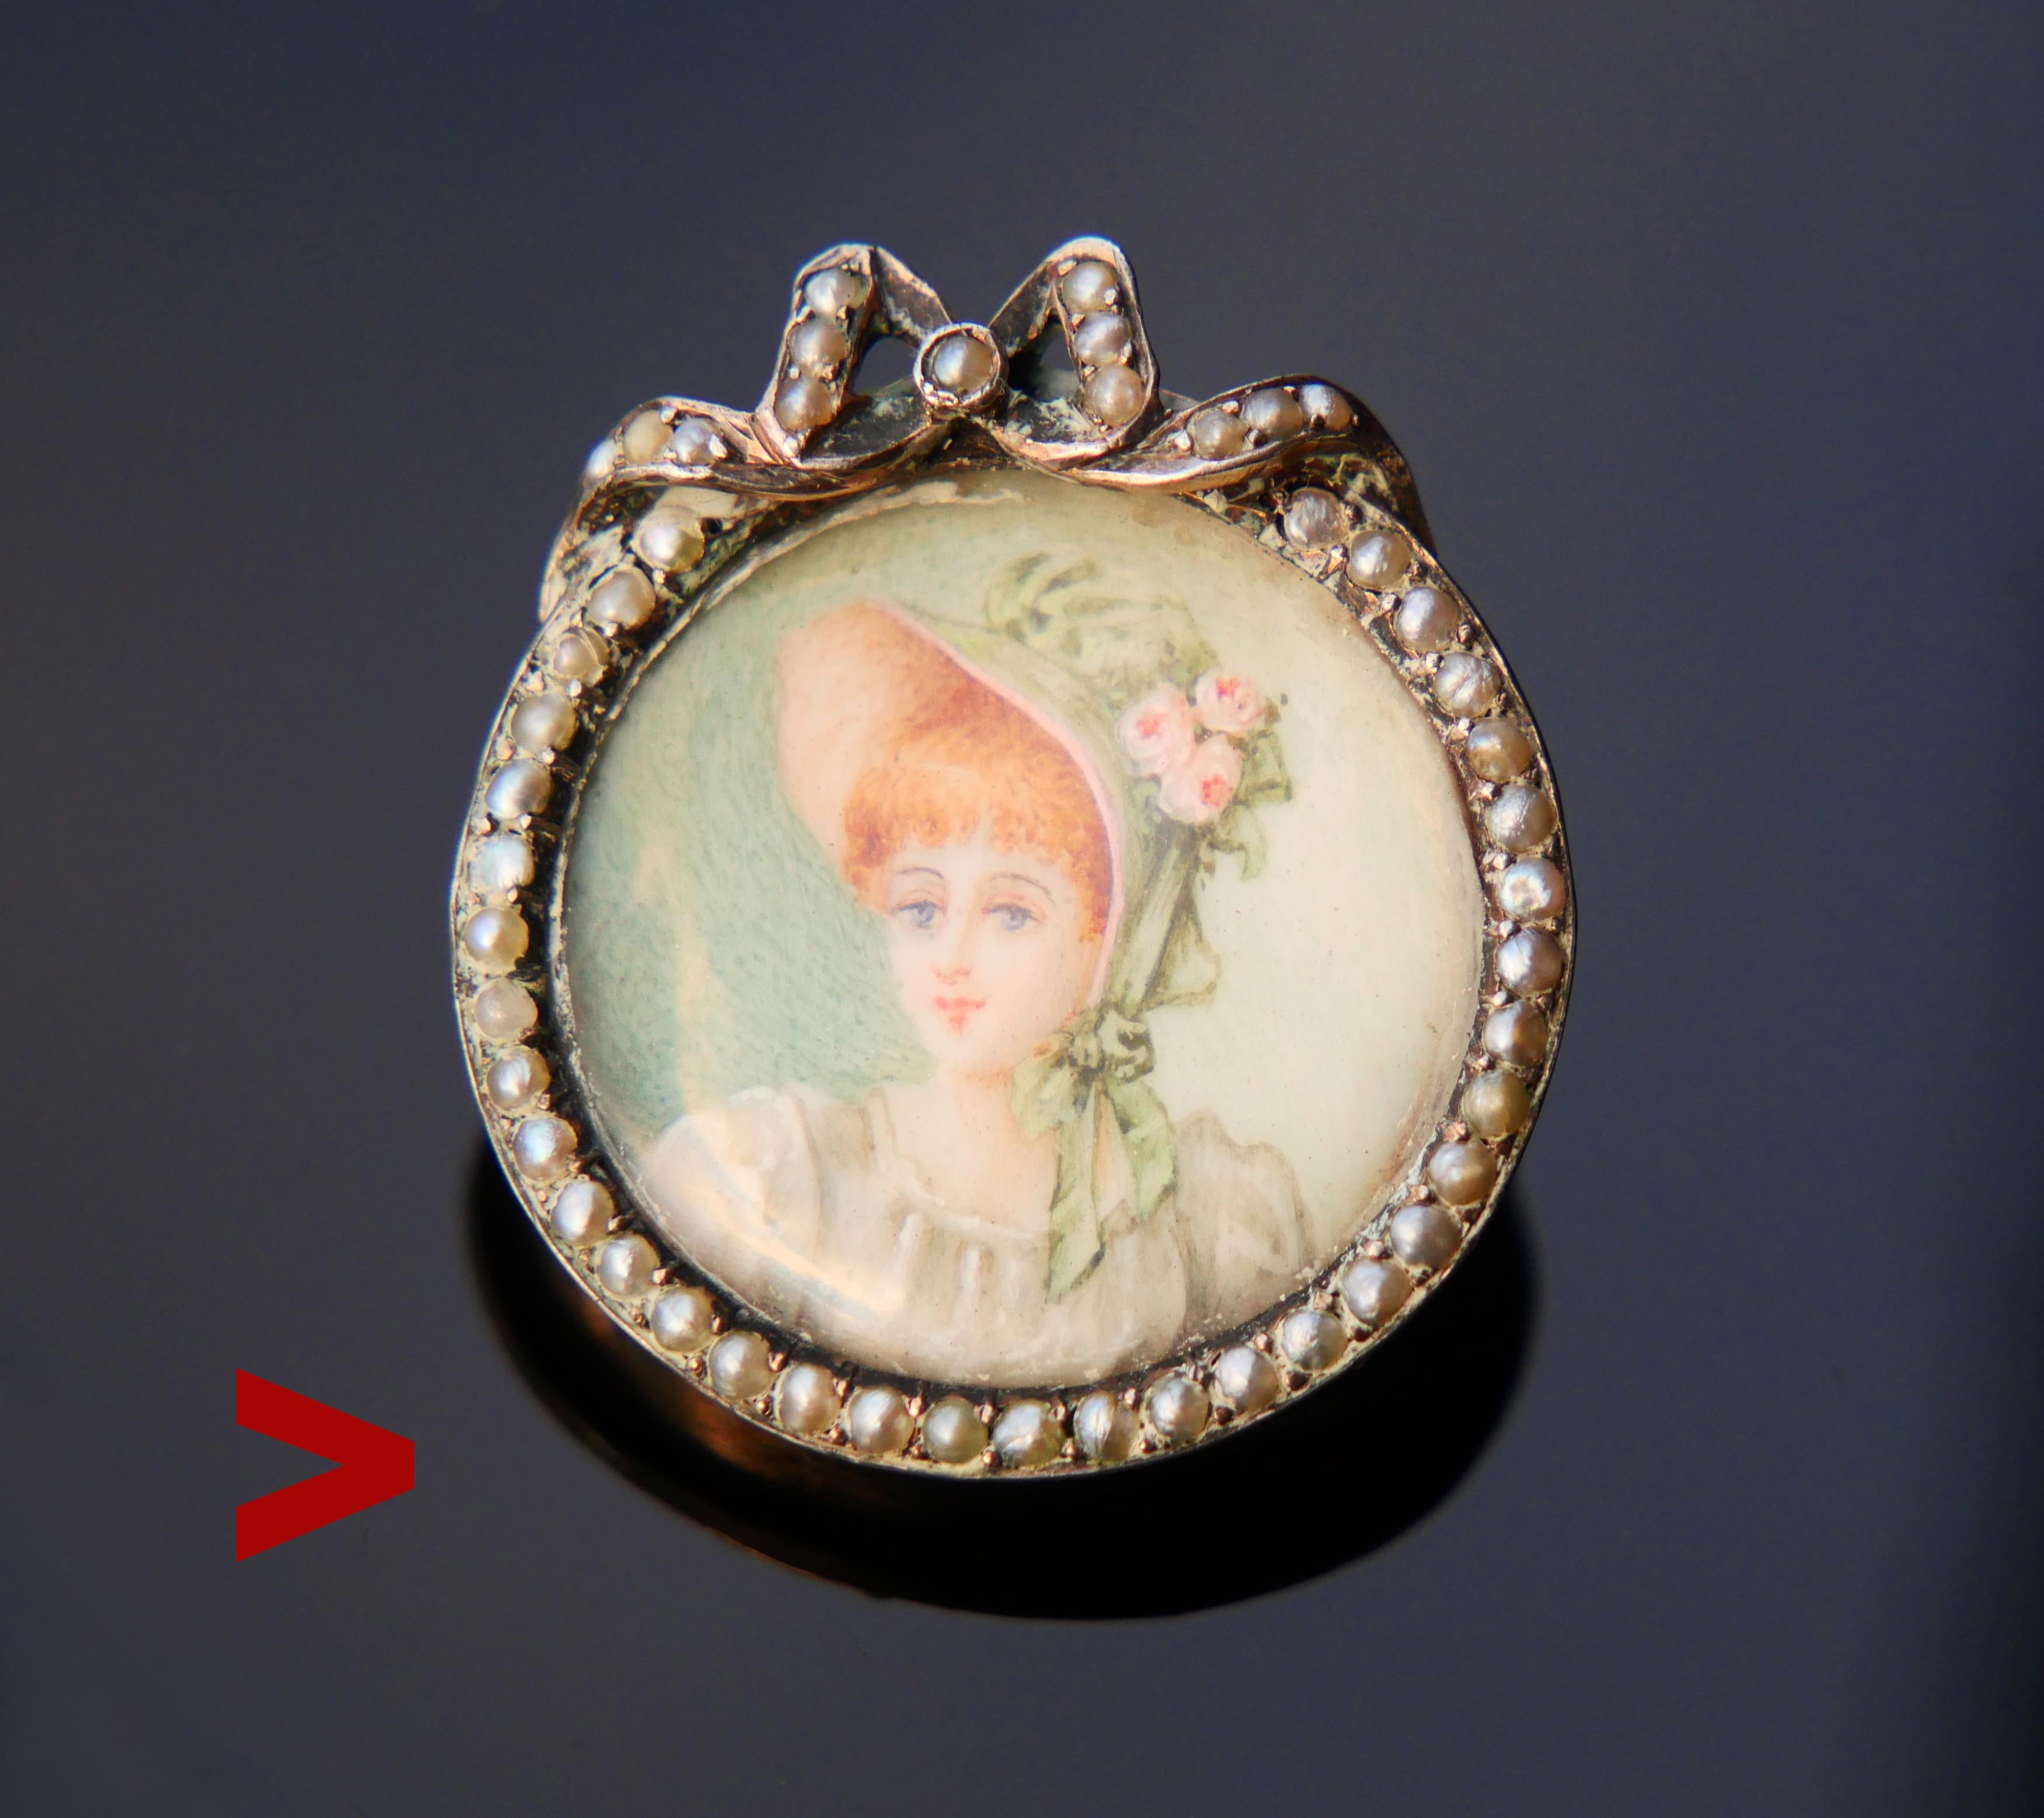 Old European pendant/brooch dating from ca. late 19th century with miniature hand-painted watercolor portrait of a Girl under convex glass. The exact origin is unknown, likely German creation.

All metal parts in solid 900 Silver ( hallmarked ).